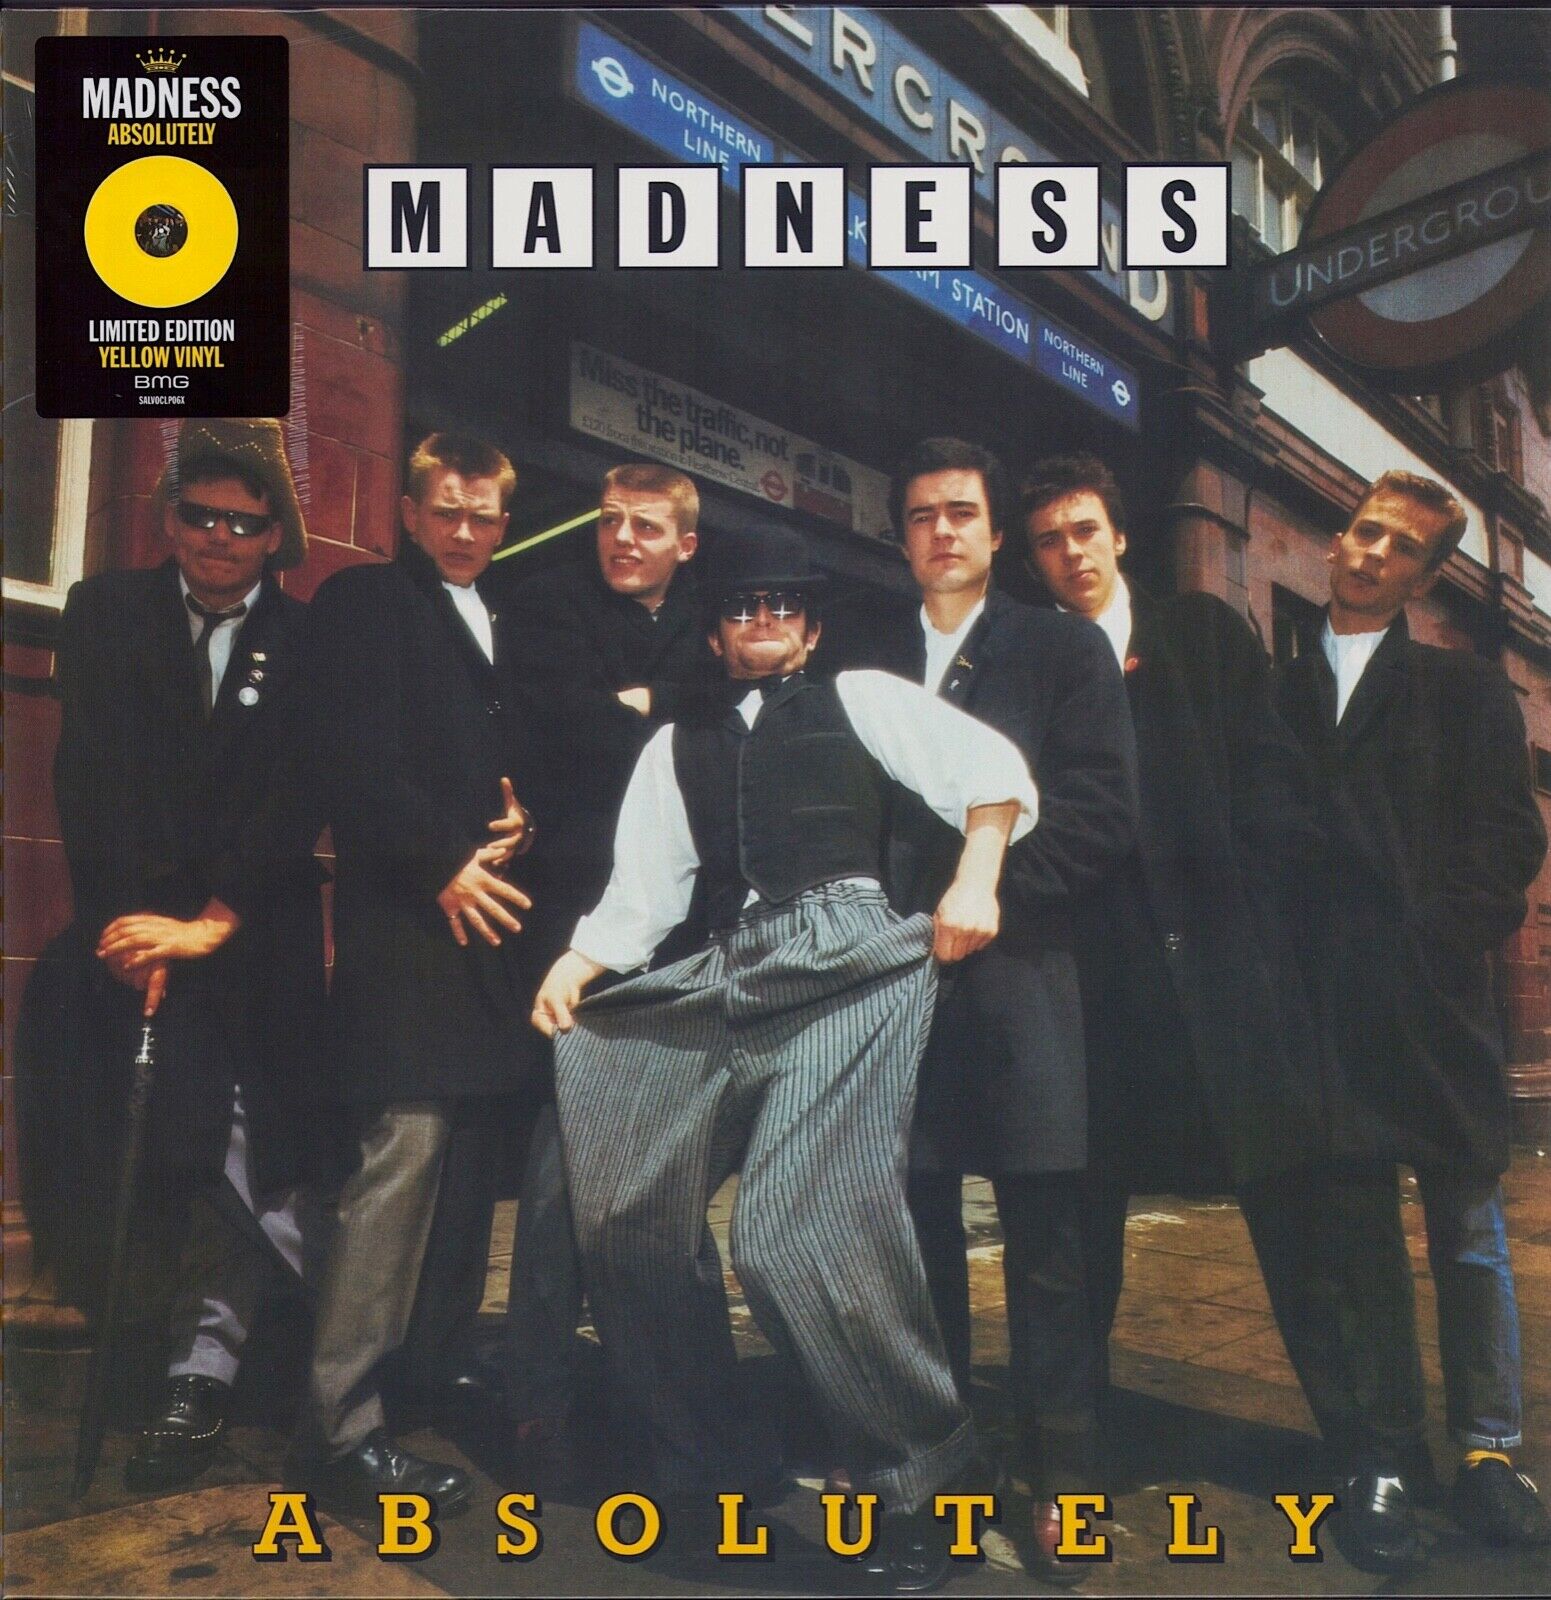 Madness ‎- Absolutely Yellow Vinyl LP Limited Edition